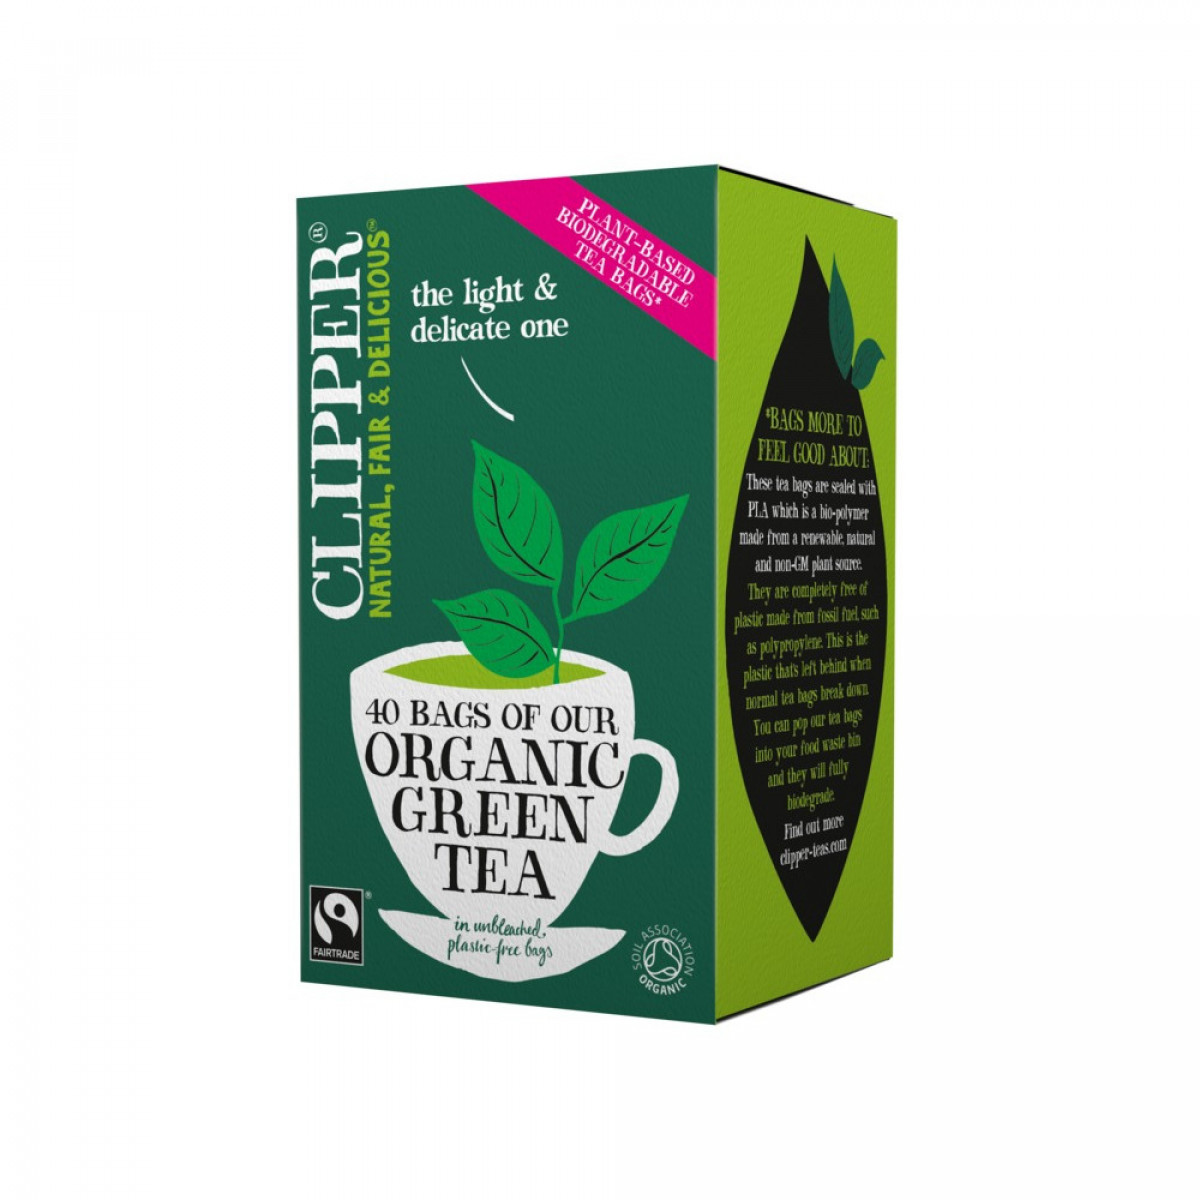 Product picture for Green Tea Bags